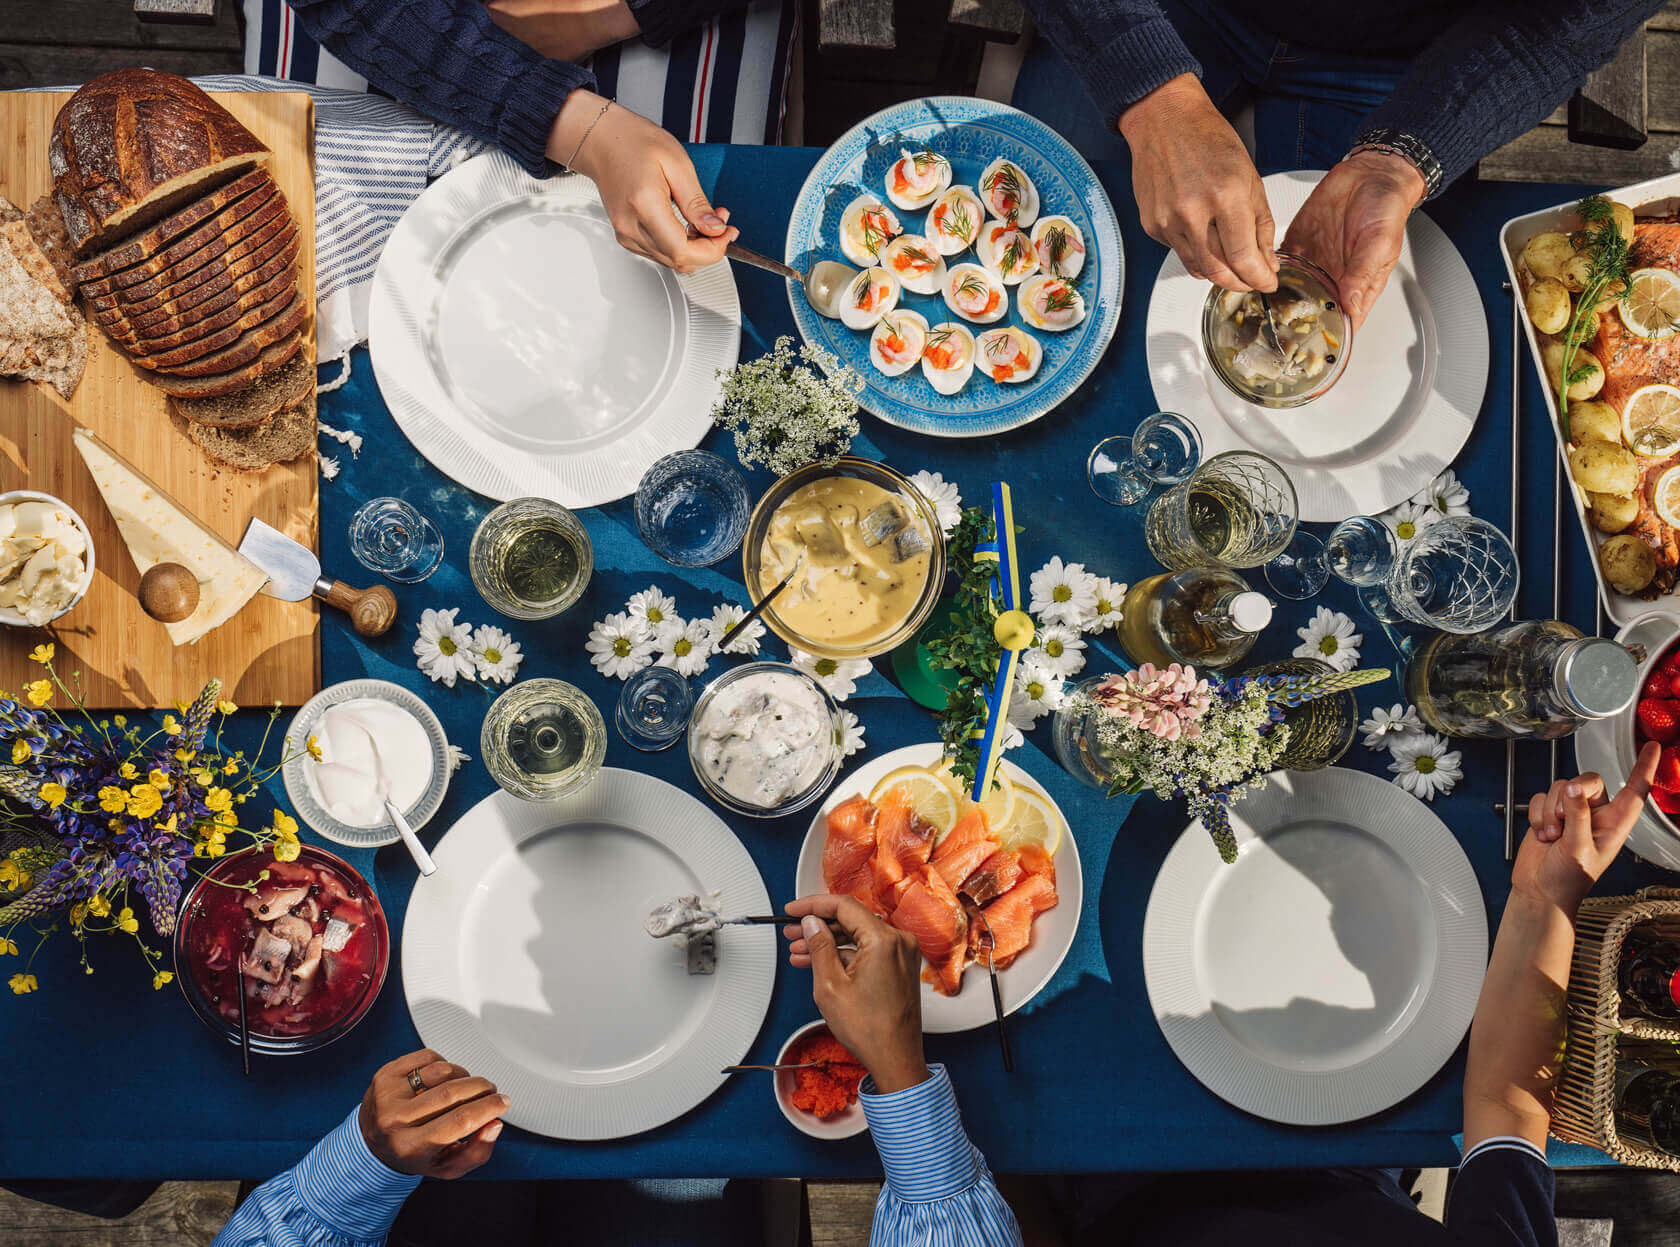 A table full of plates showing Scandinavian food